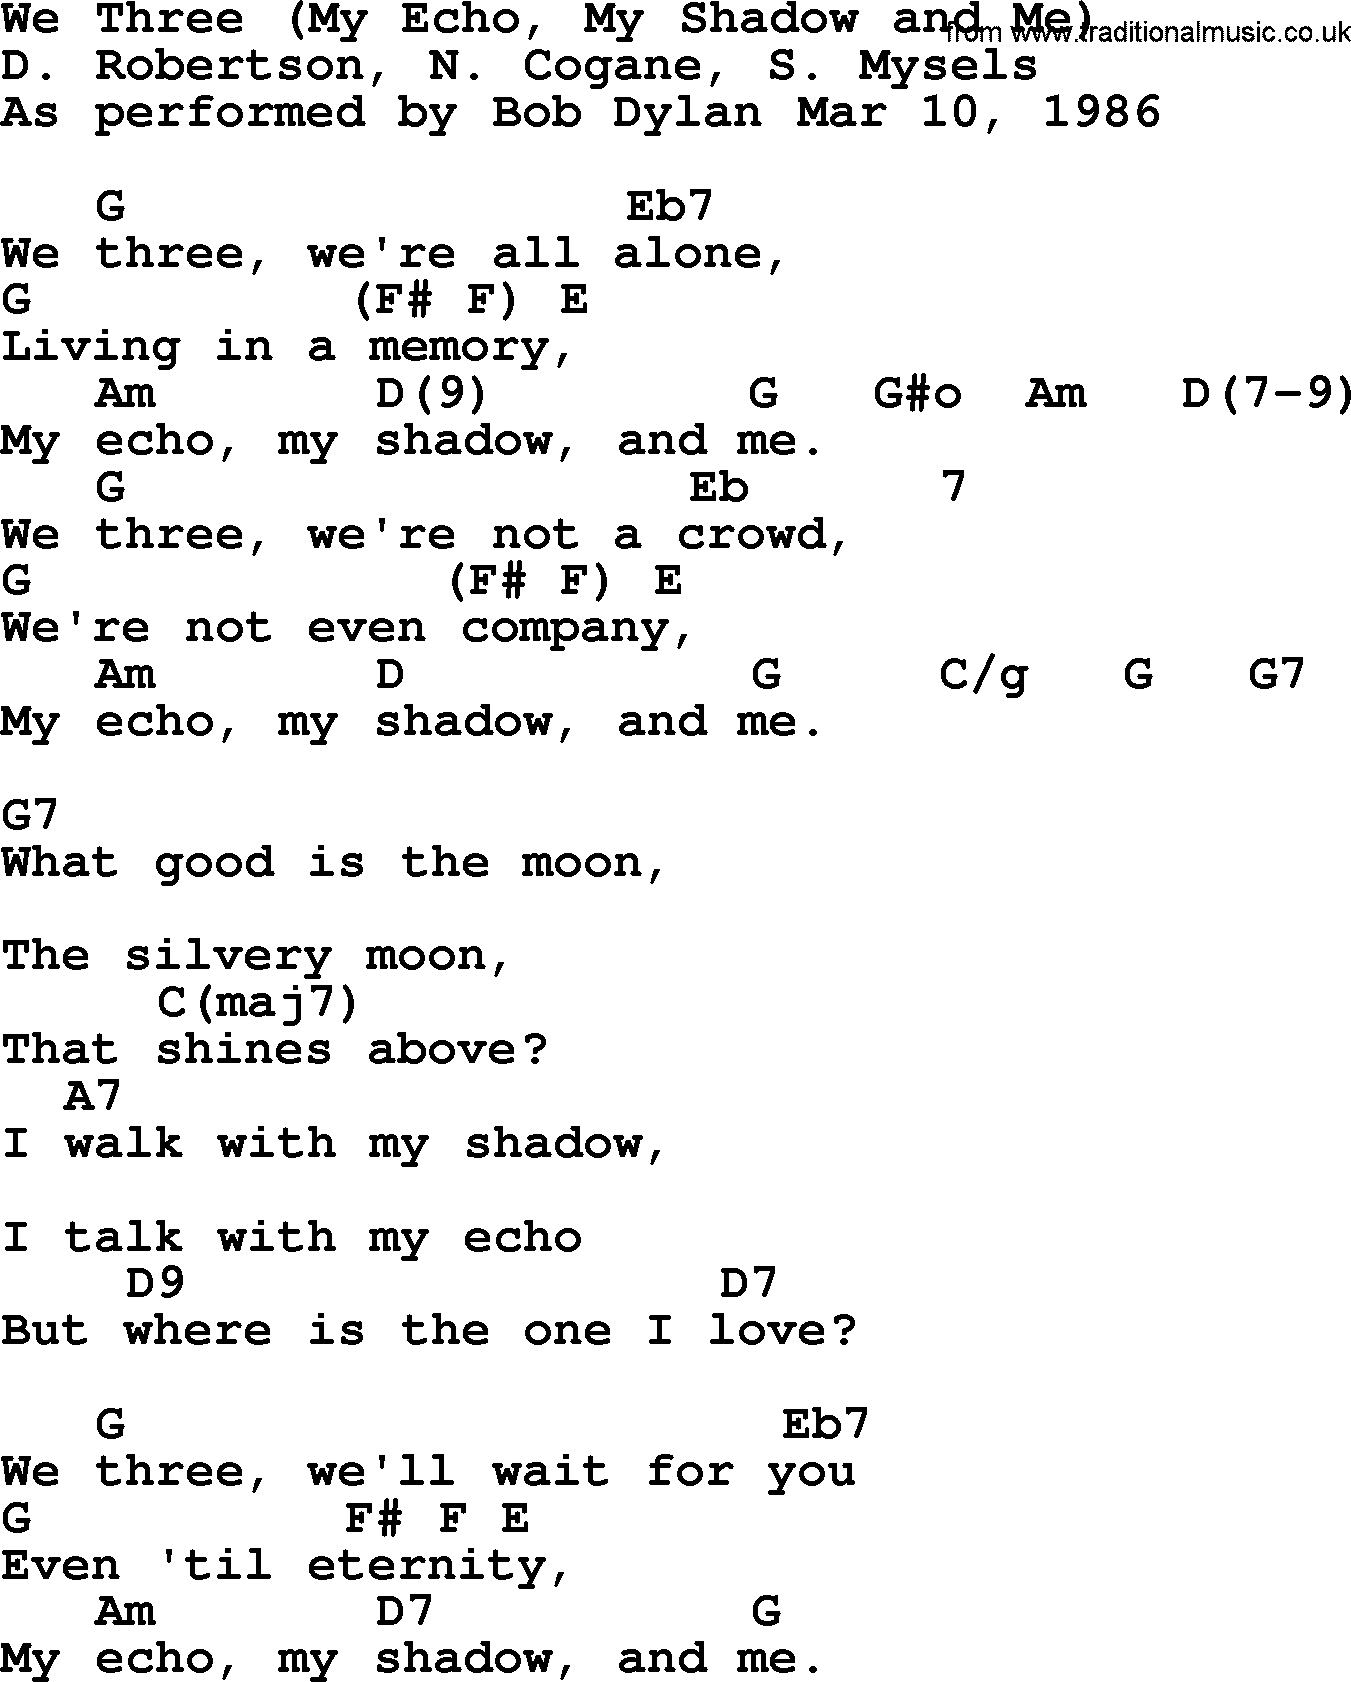 Bob Dylan song, lyrics with chords - We Three (My Echo, My Shadow and Me)